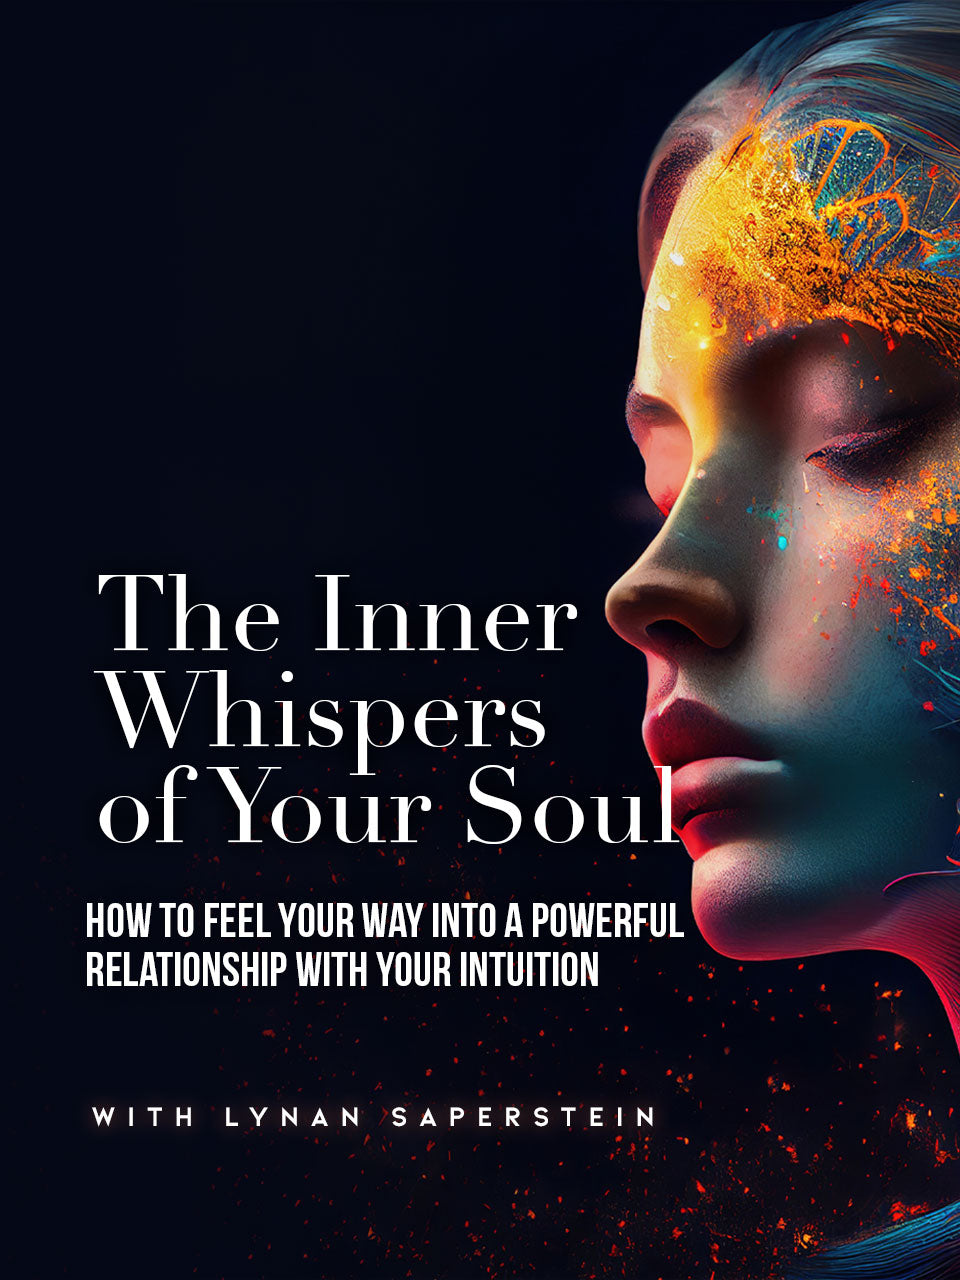 The Inner Whispers of Your Soul